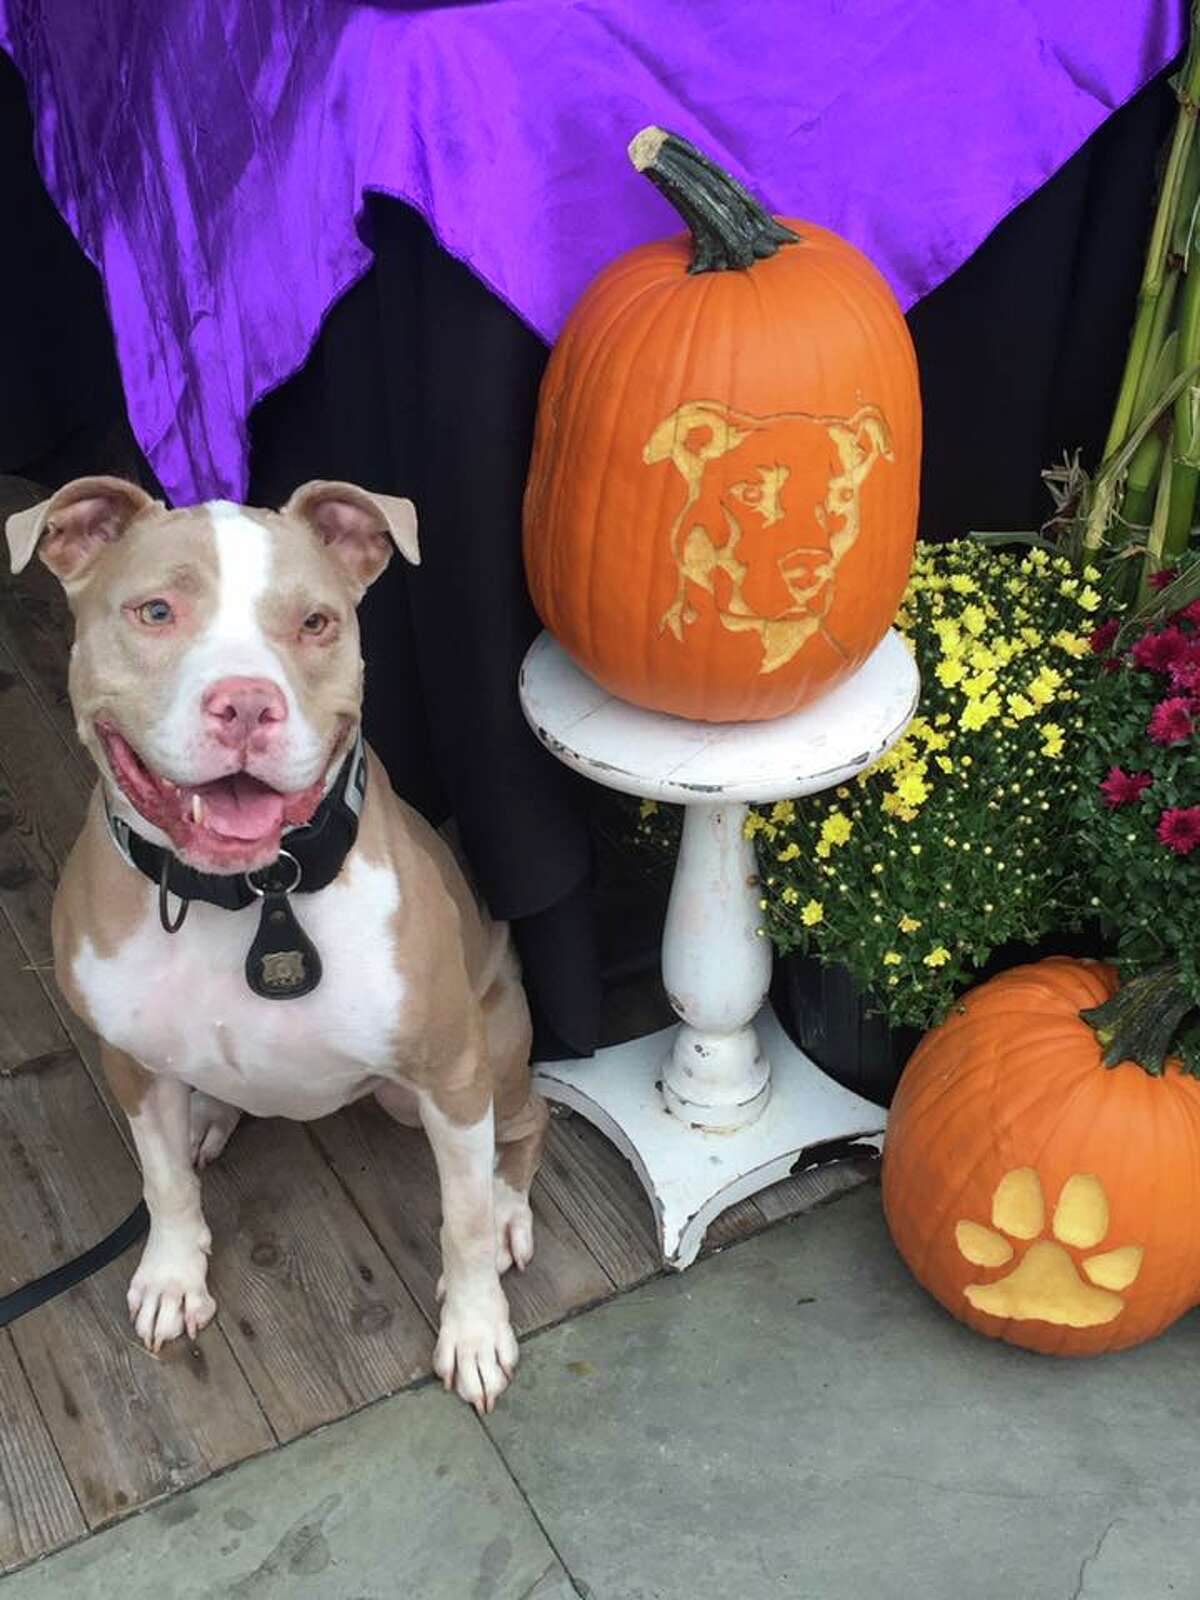 Kiah, who was once abandoned, battered and bloodied on San Antonio-area streets, will receive a New York City honor on Nov. 17 for being the first pit bull police dog in the state after she was relocated their last year.